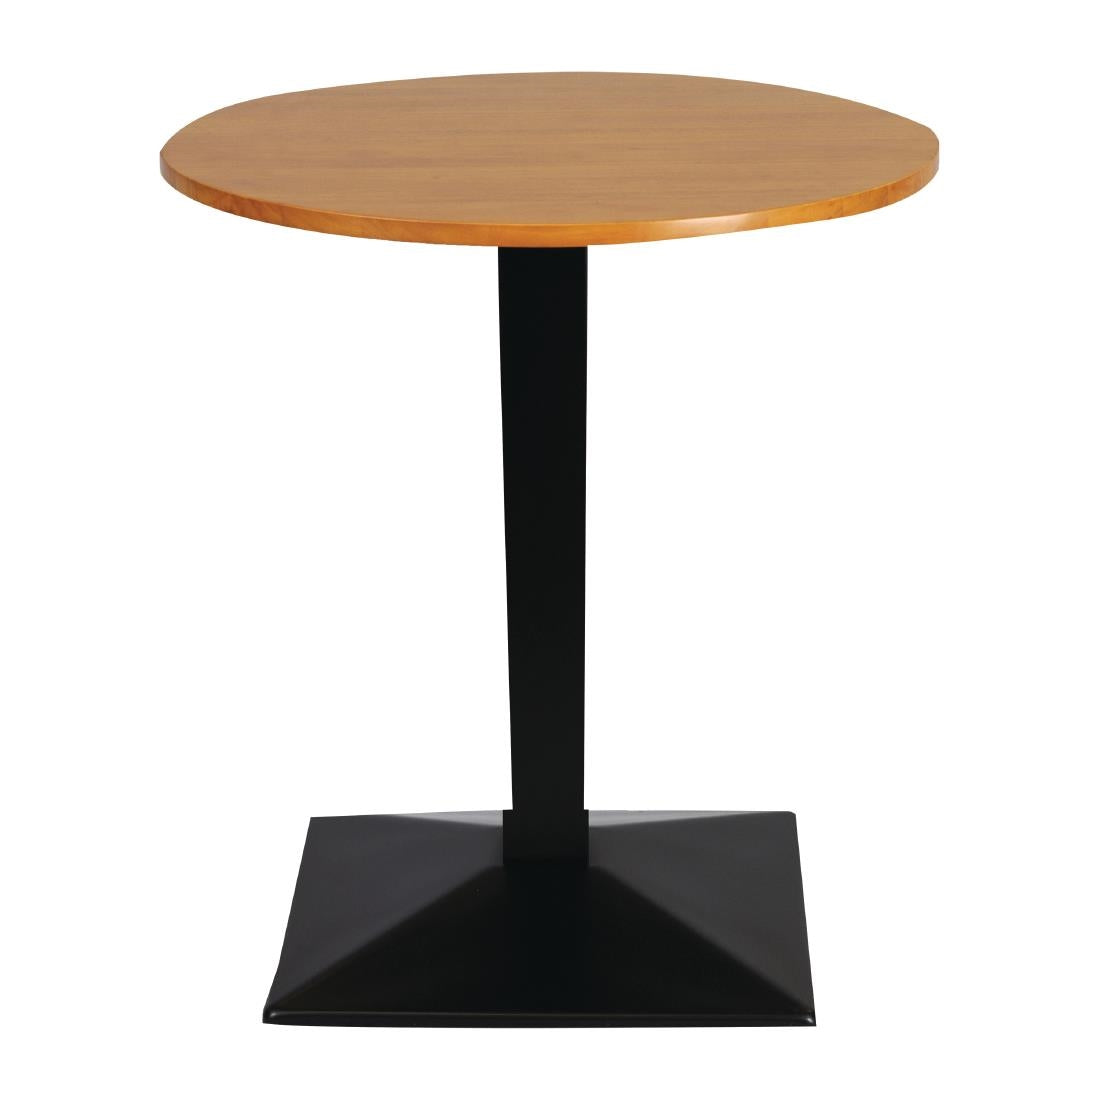 FT500 Turin Metal Base Pedestal Round Table with Soft Oak Top 700mm JD Catering Equipment Solutions Ltd